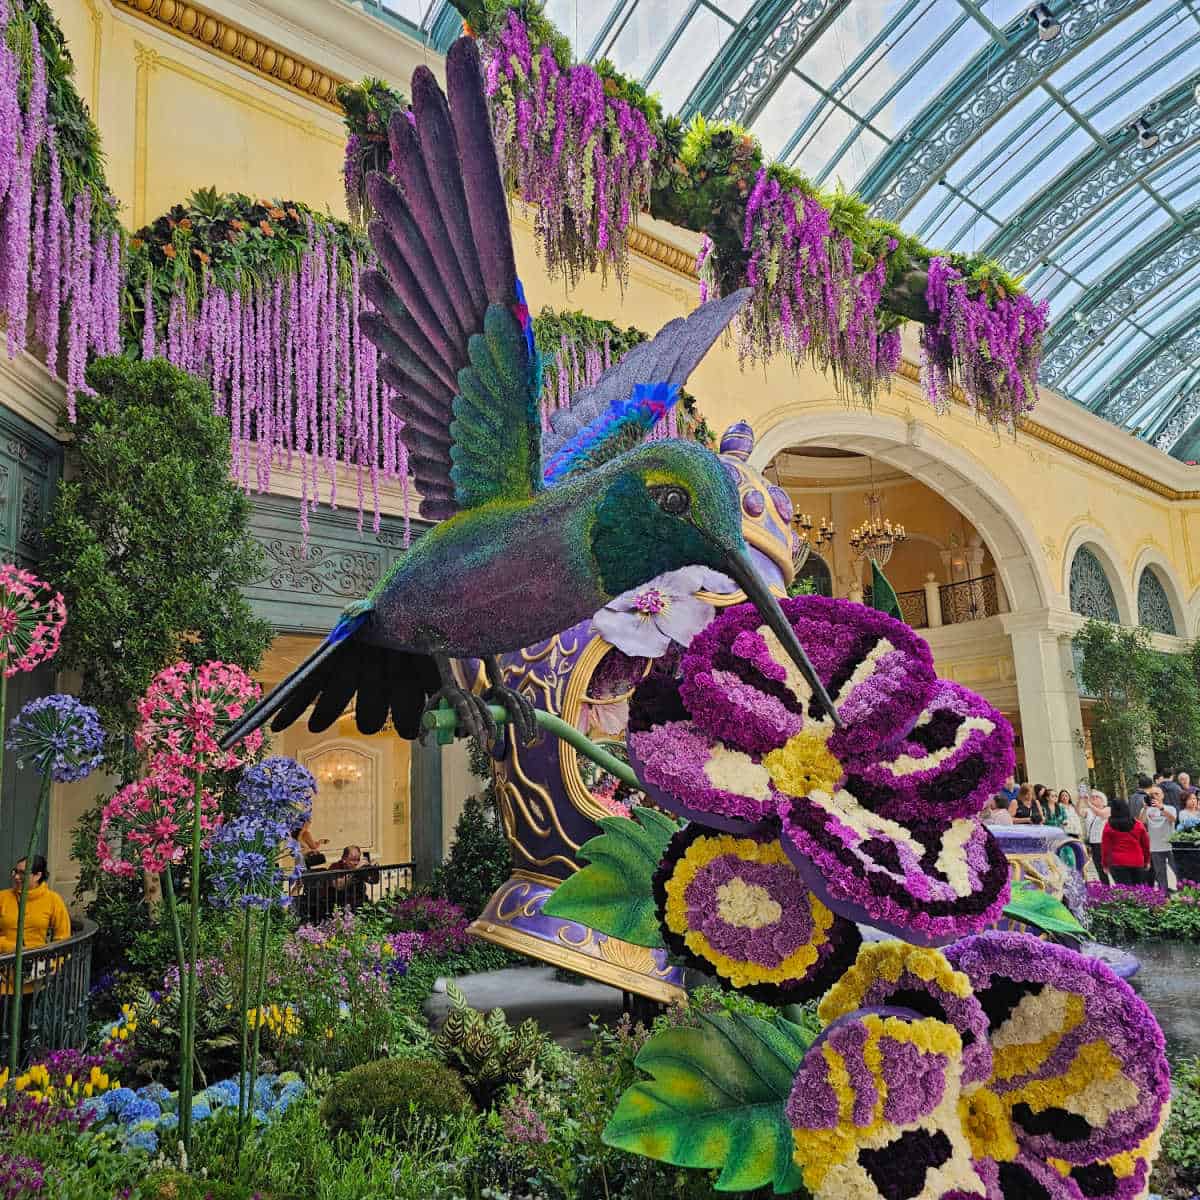 Purple hummingbird and flowers made out of flowers on display in the Bellagio Flower Garden with flowers hanging from the walls